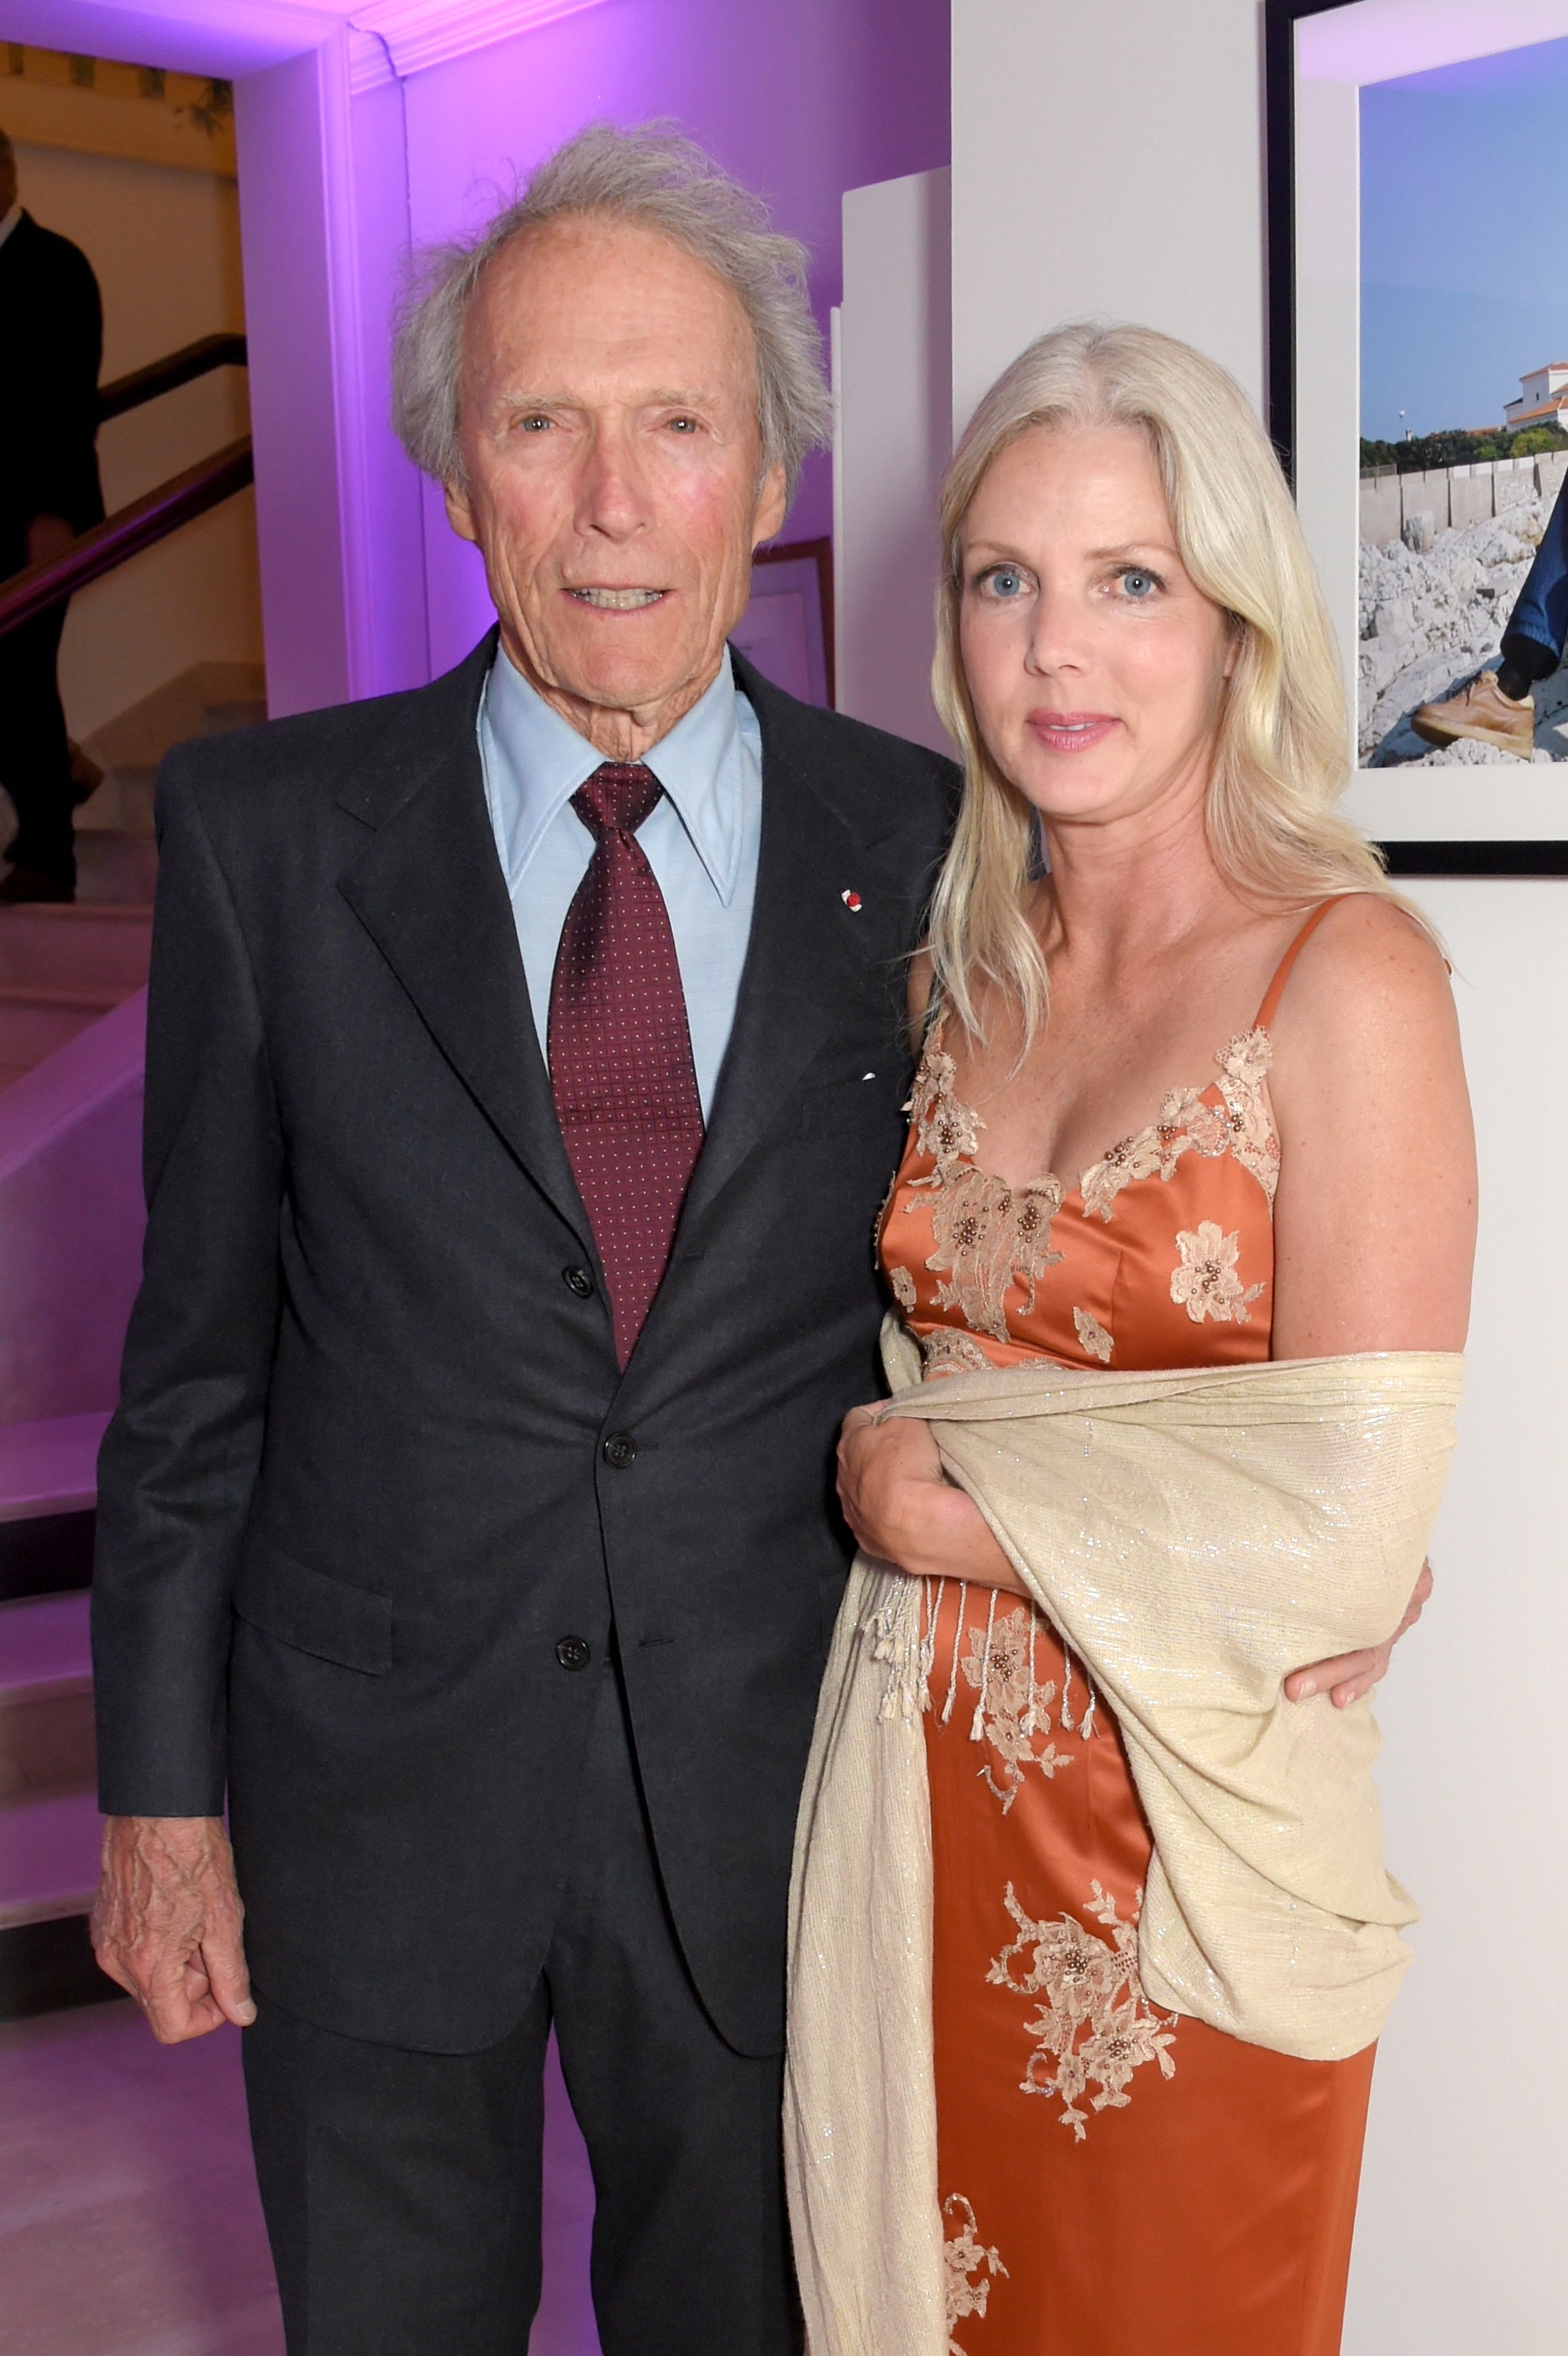 Clint Eastwood and Christina Sandera attend the Vanity Fair and Chopard Party celebrating the Cannes Film Festival at Hotel du Cap-Eden-Roc on May 20, 2017. | Source: Getty Images